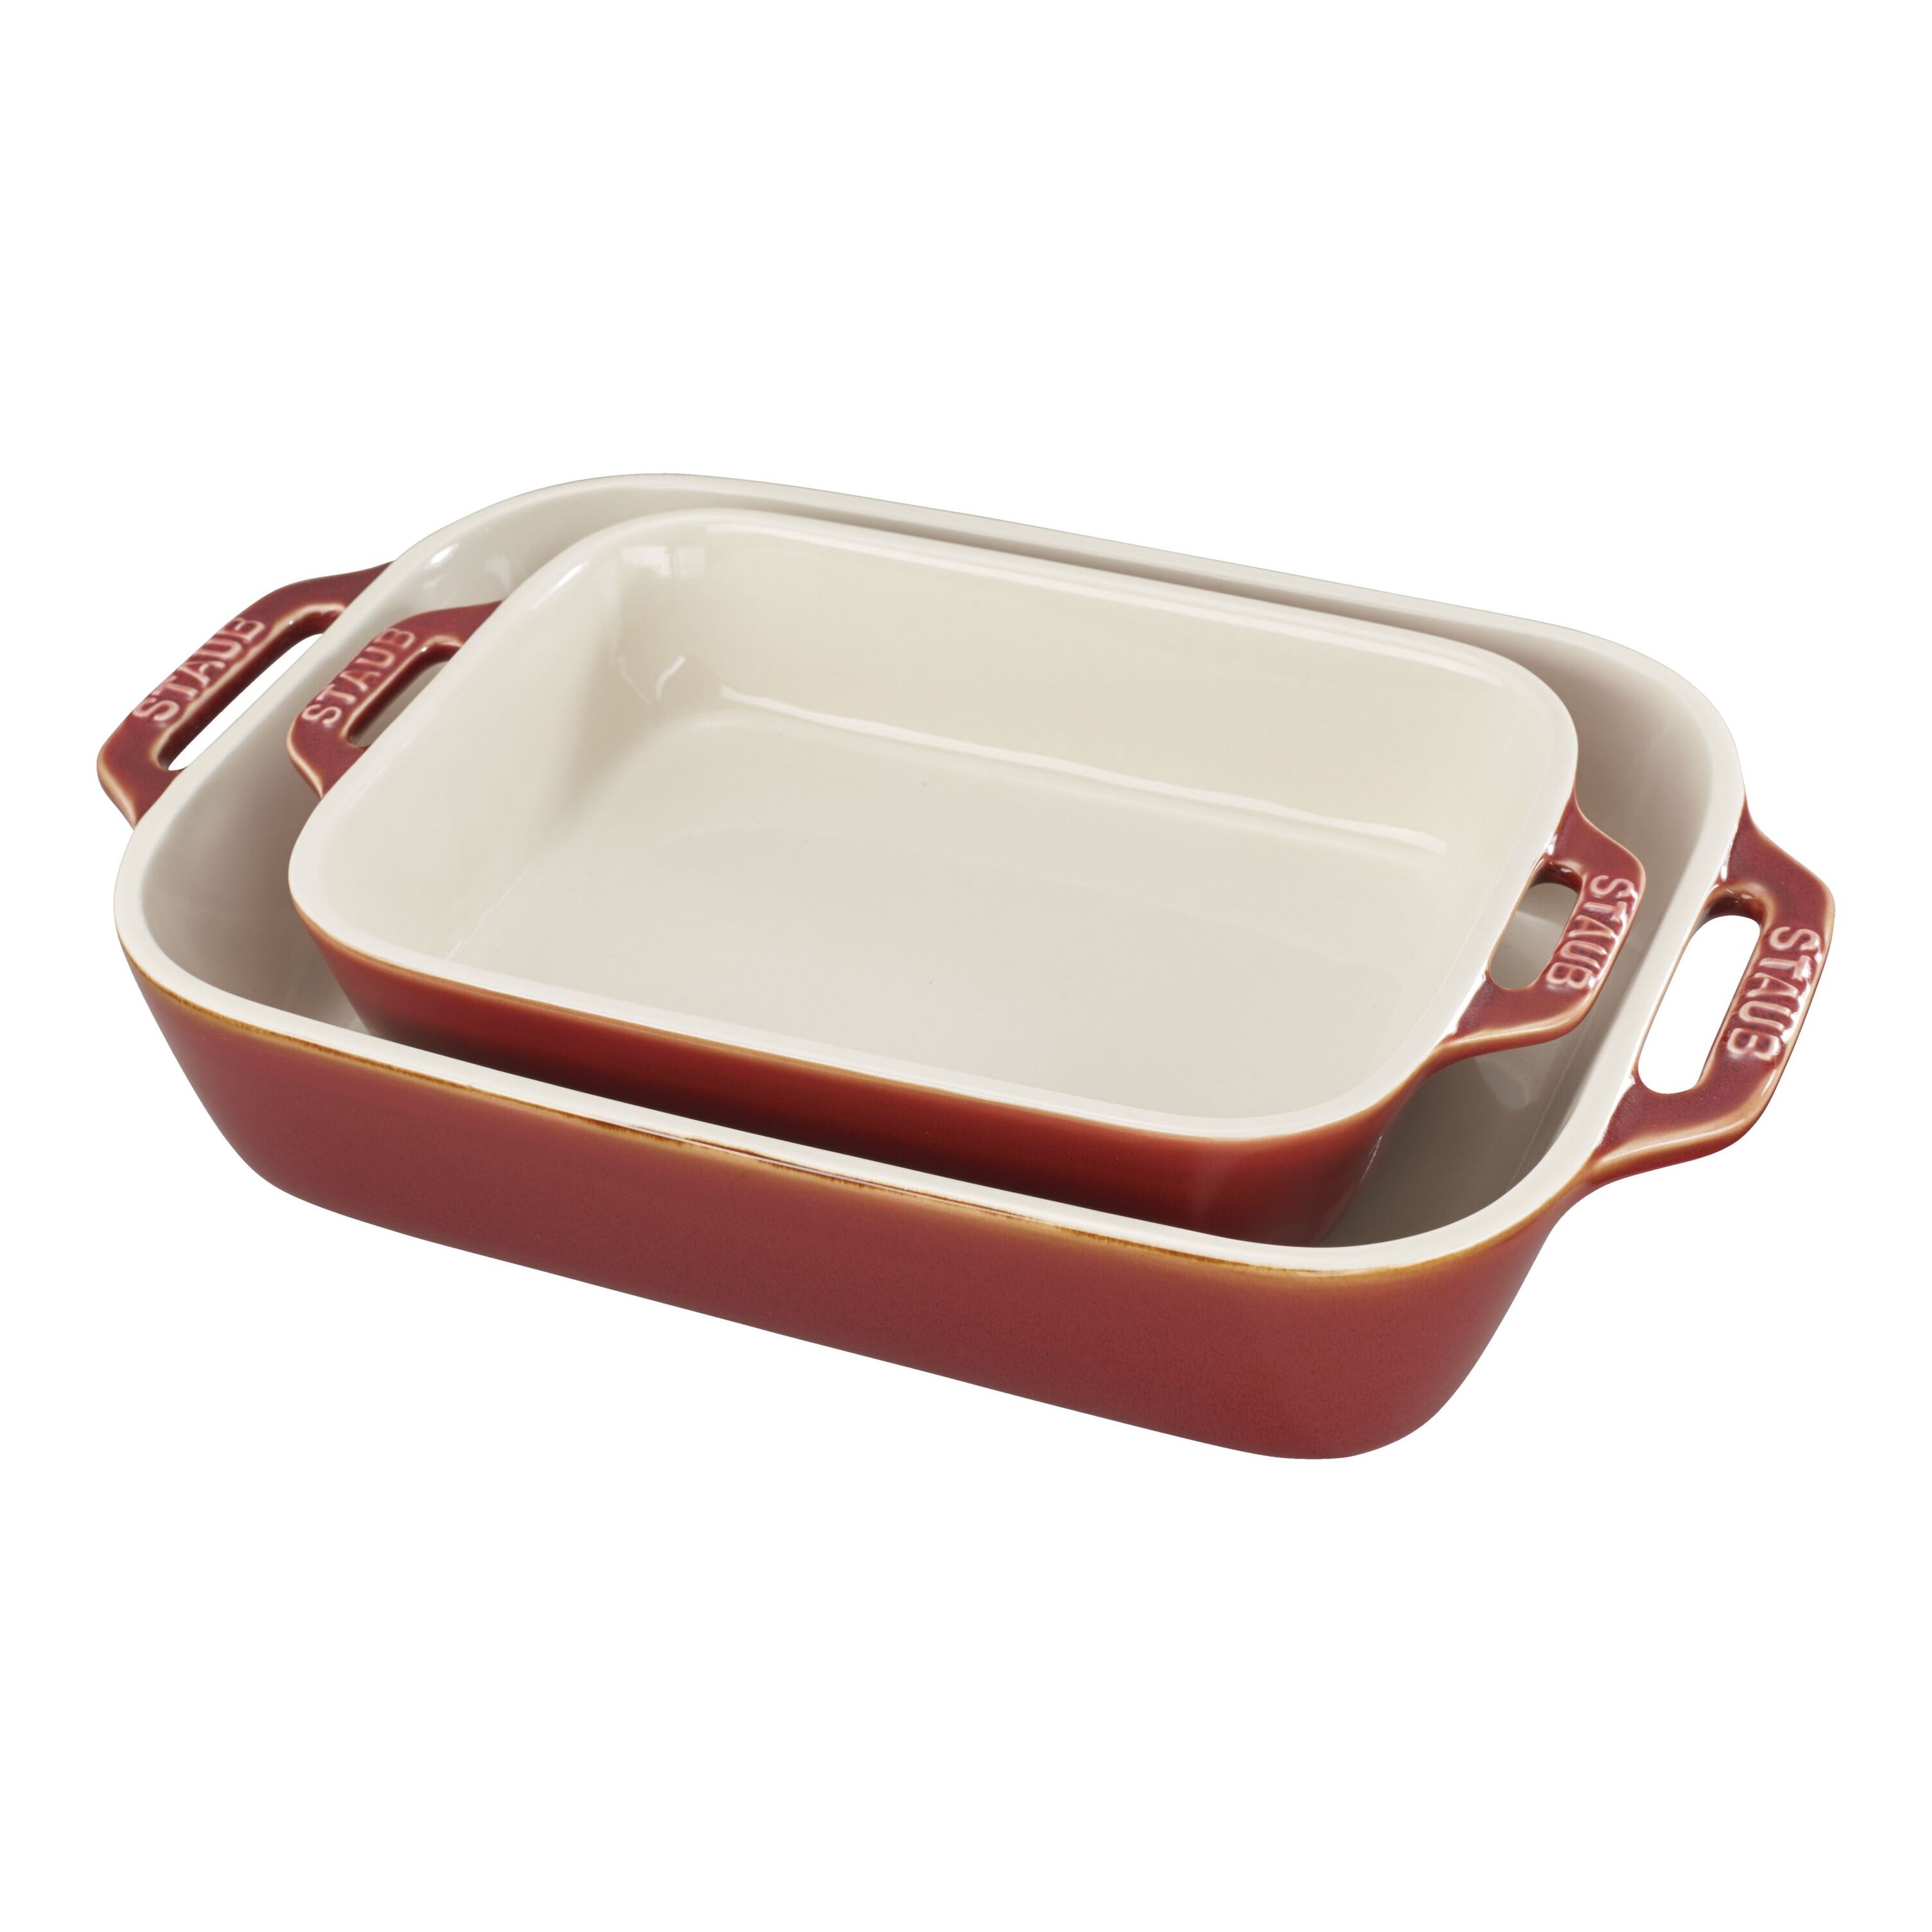 Destination Holiday Basket Weave Ceramic Casserole Dish with Lid - Shop  Pans & Dishes at H-E-B